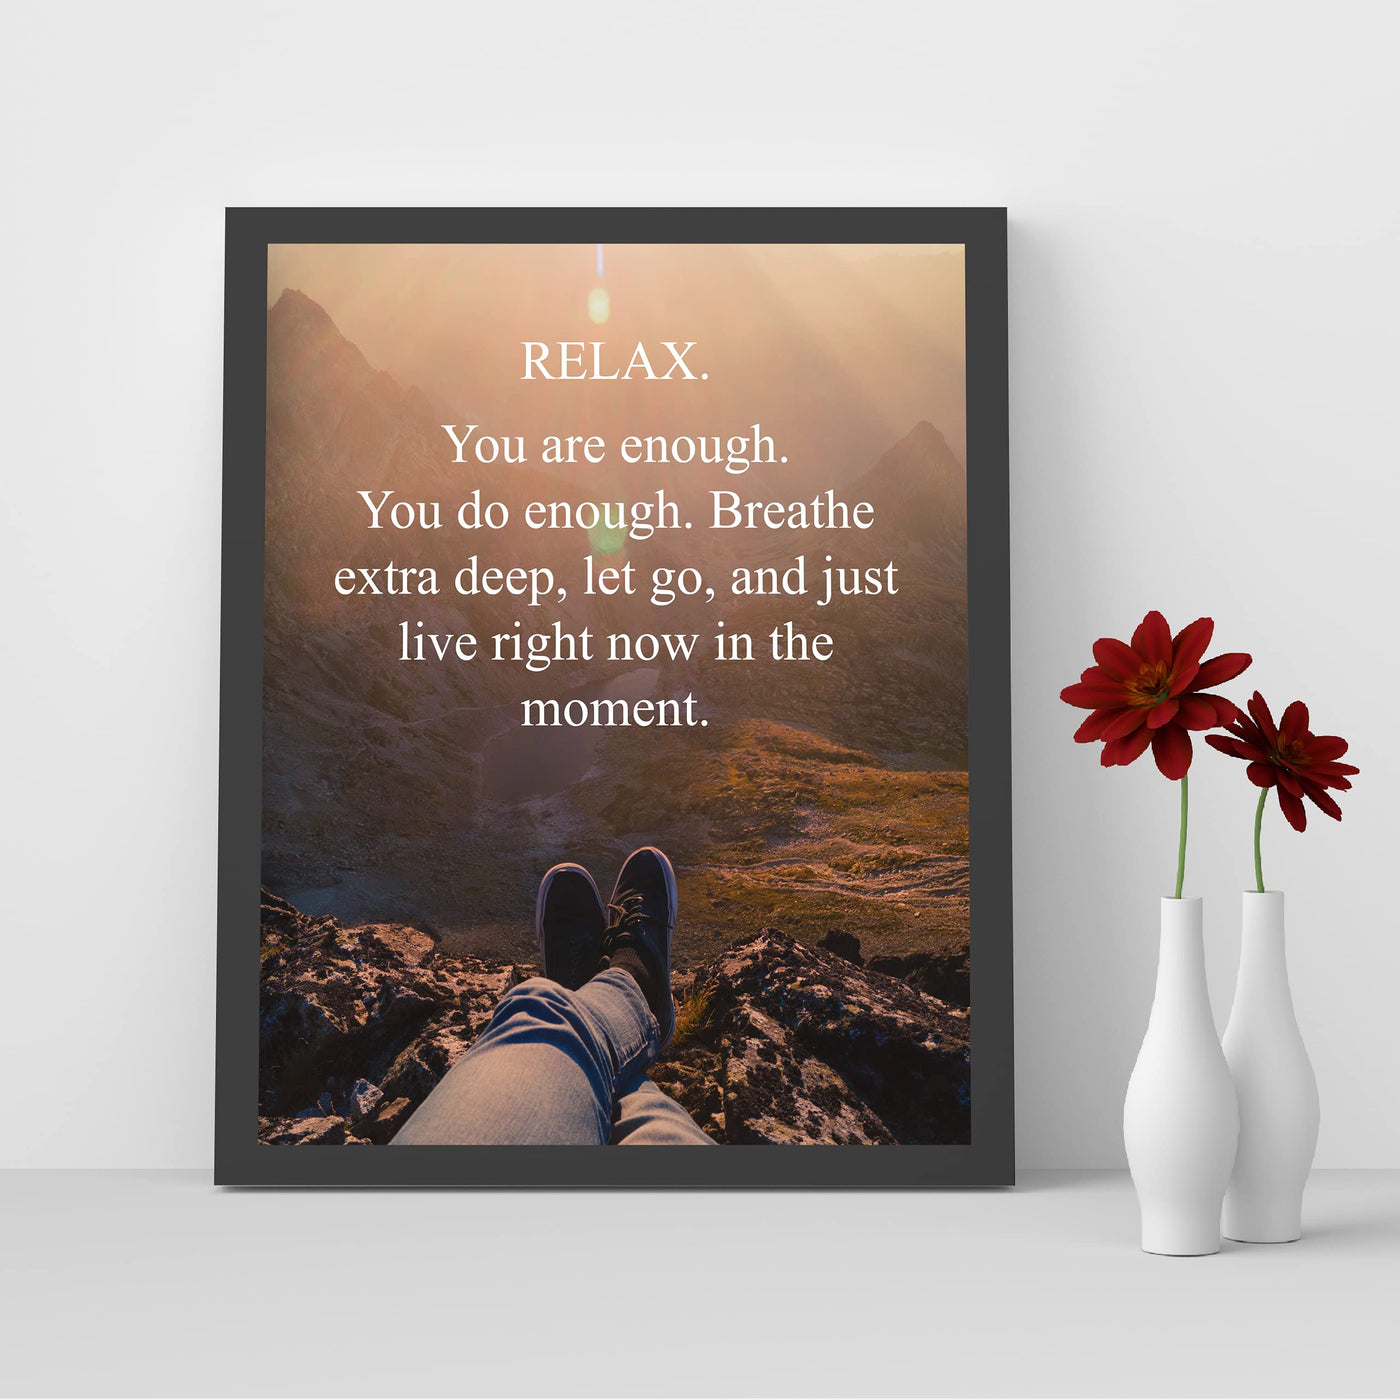 Relax-Breathe-Let Go-Live in the Moment-Spiritual Quotes Wall Art -8 x 10" Inspirational Mountain Landscape Print-Ready to Frame. Home-School-Studio-Office Decor. Great Reminder to Just Breathe!